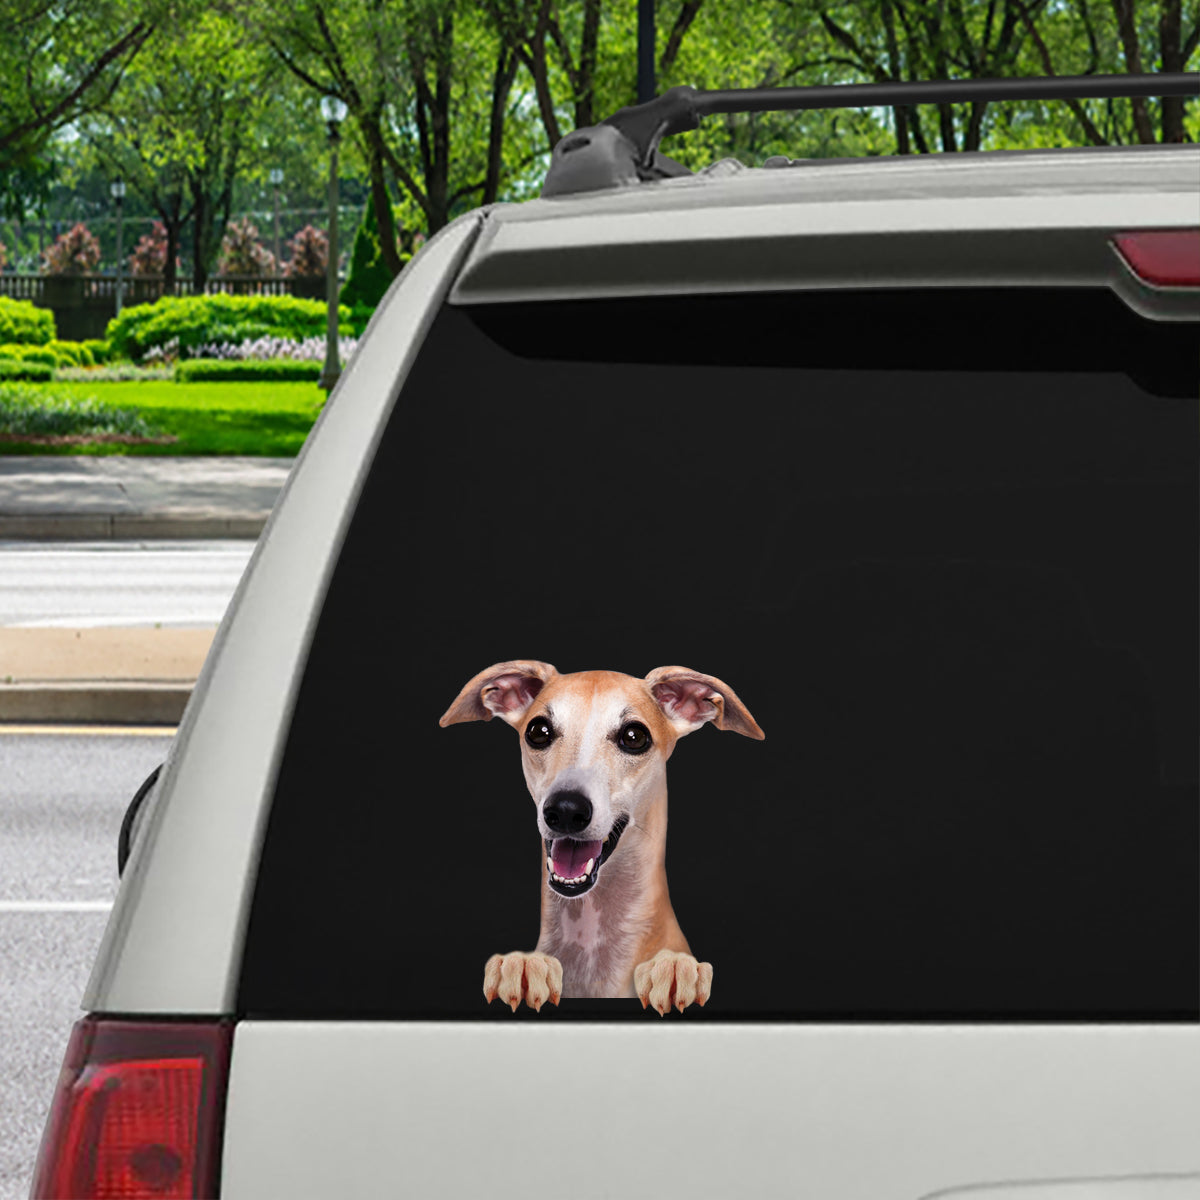 Can You See Me Now - Whippet Car/ Door/ Fridge/ Laptop Sticker V1